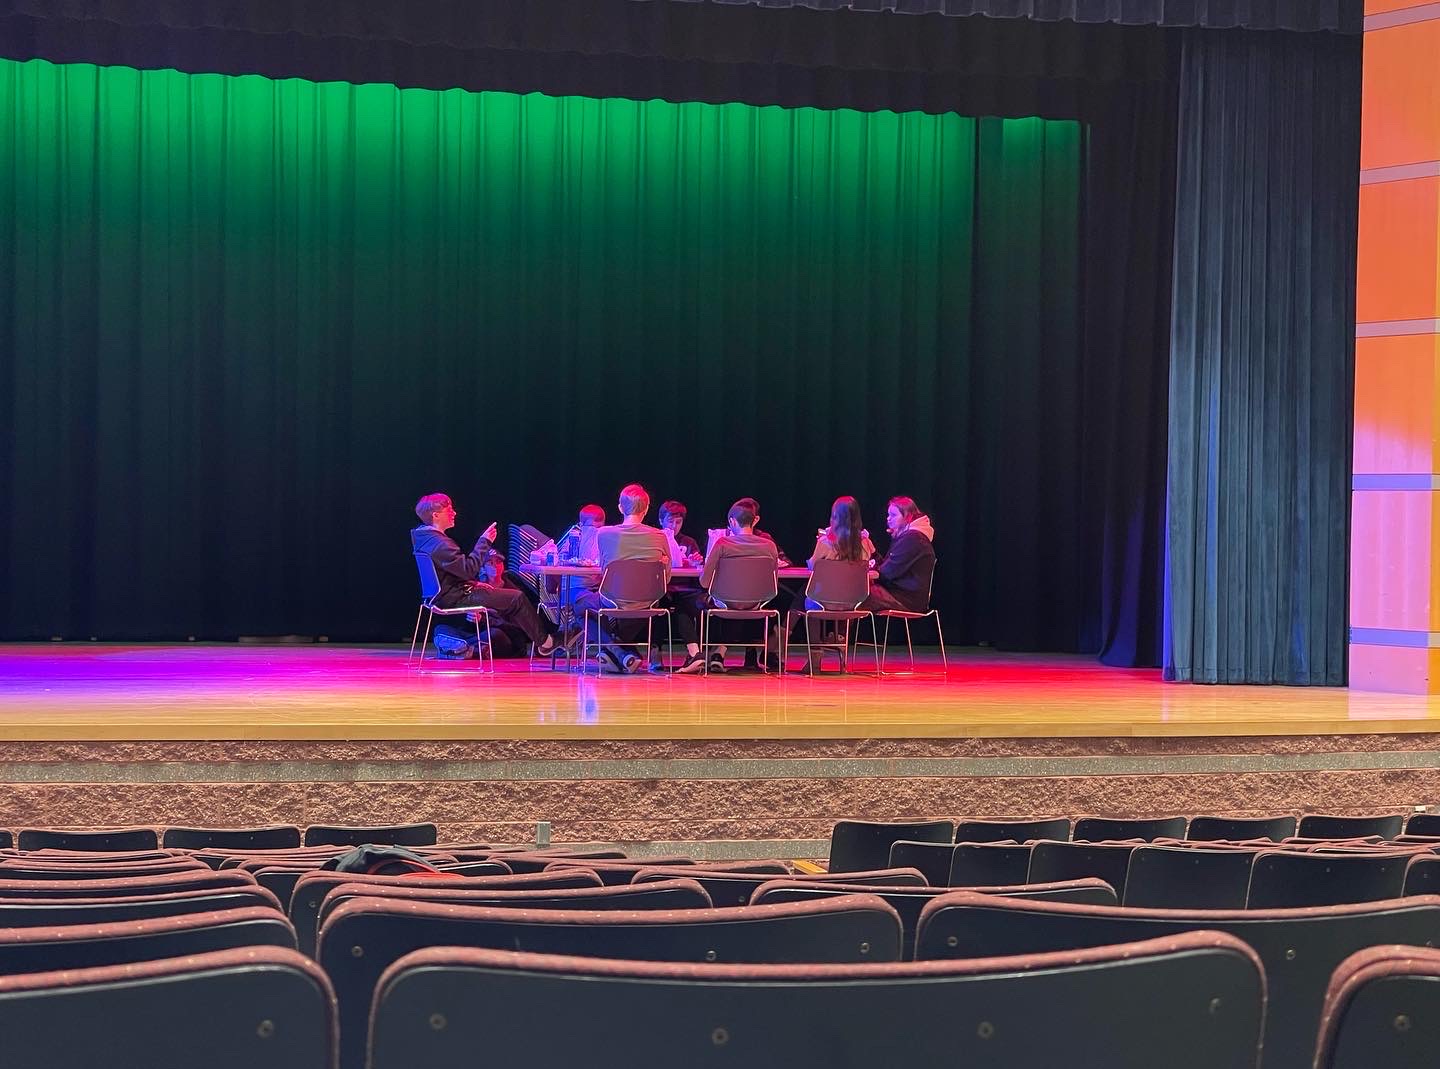 Students eating lunch together on the stage with colorful lighting during a break. 